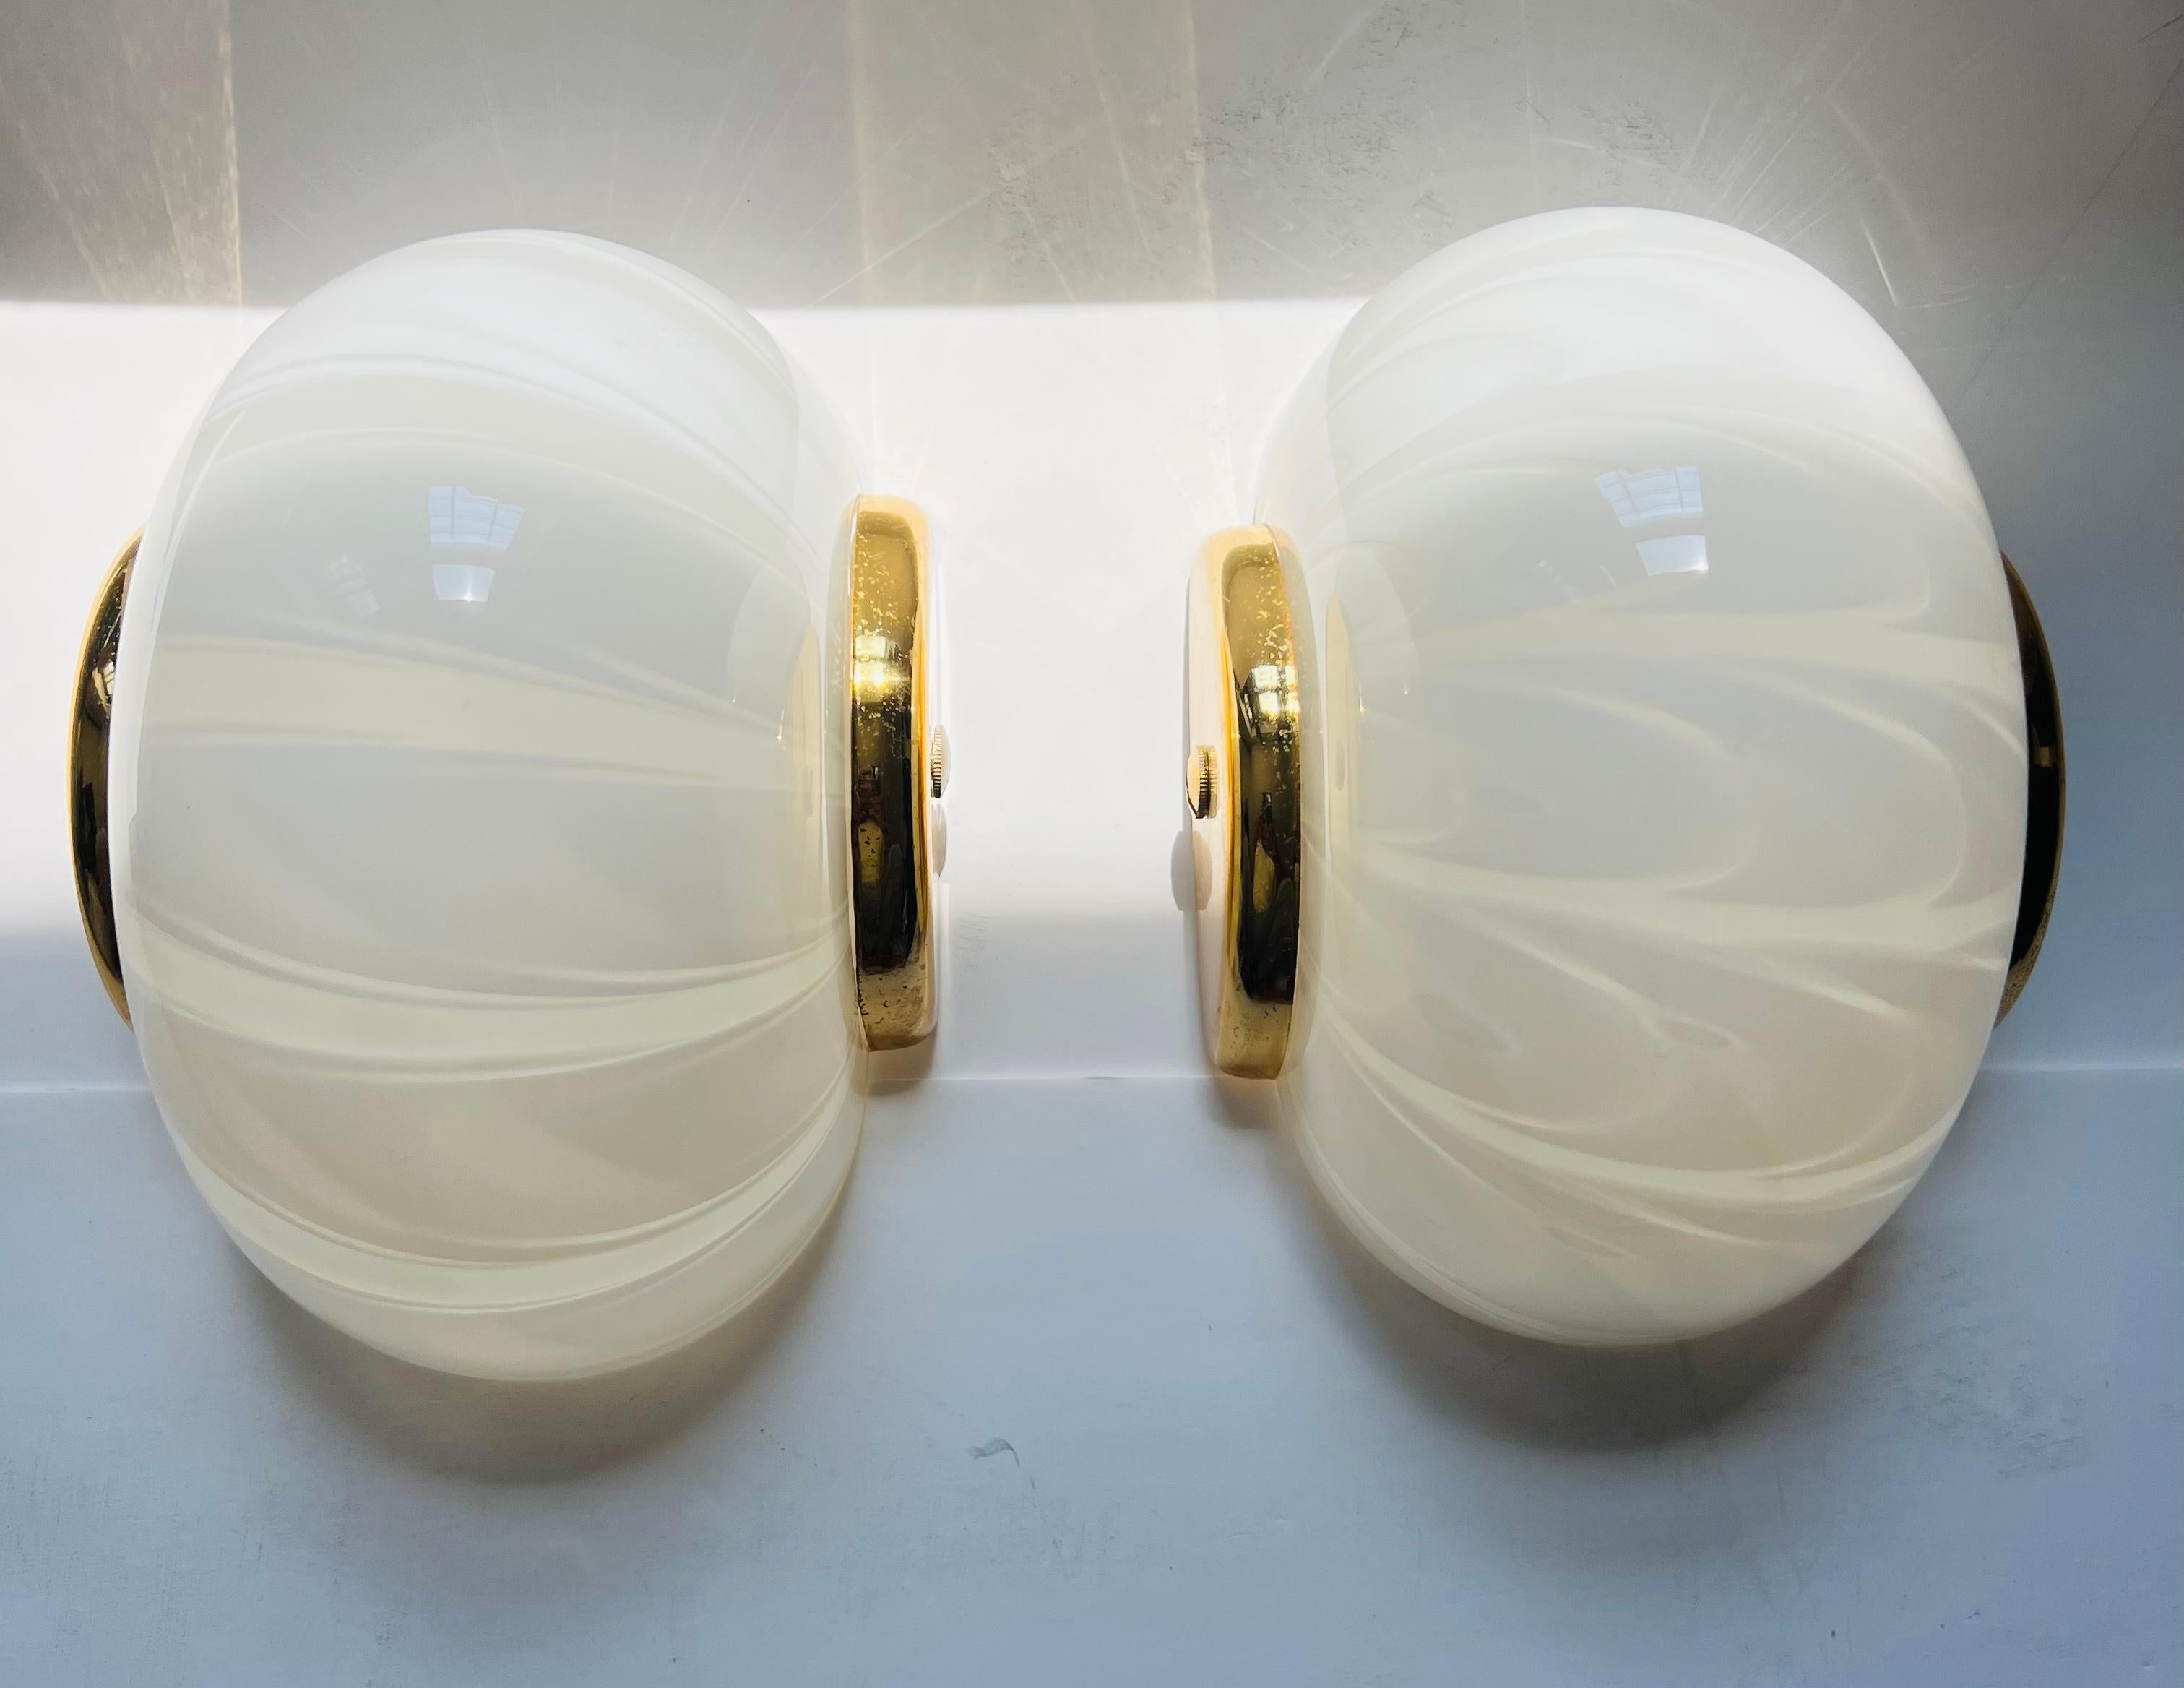 A pair of Italian 1970s egg shaped wall lamps in white and clear Murano glass with polished brass fittings. Made by the Italian light maker, Fabbian. Newly rewired. Can be hung vertical
Or horizontal.